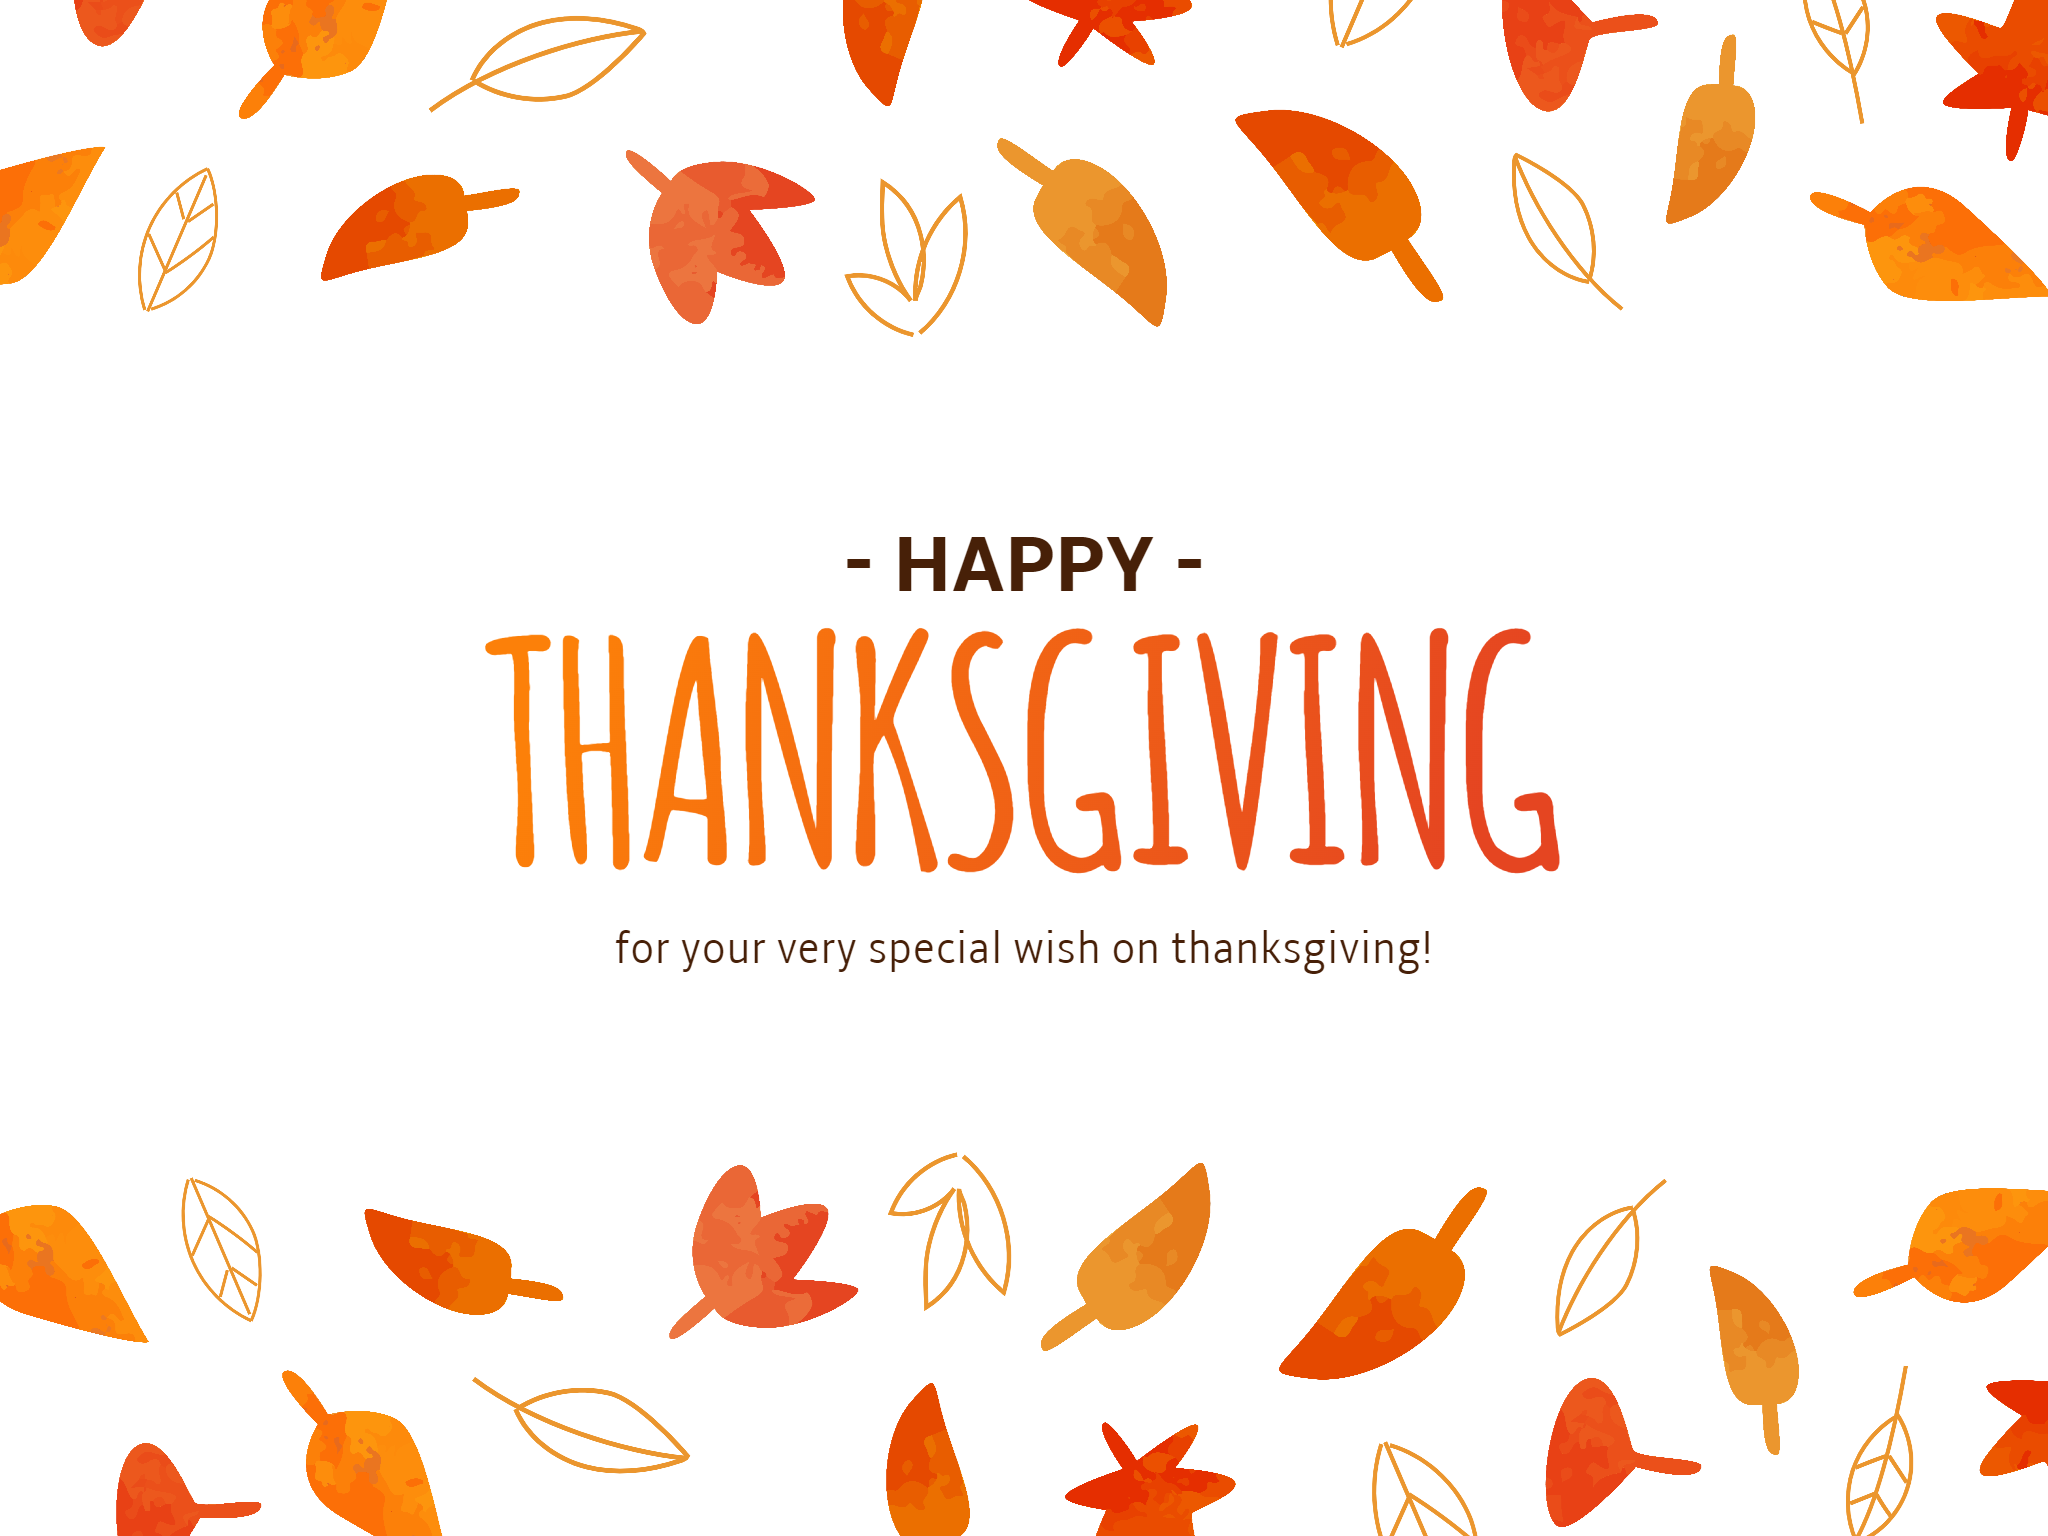 20+ Thanksgiving Wallpapers & Backgrounds for Your Holiday Celebration ...